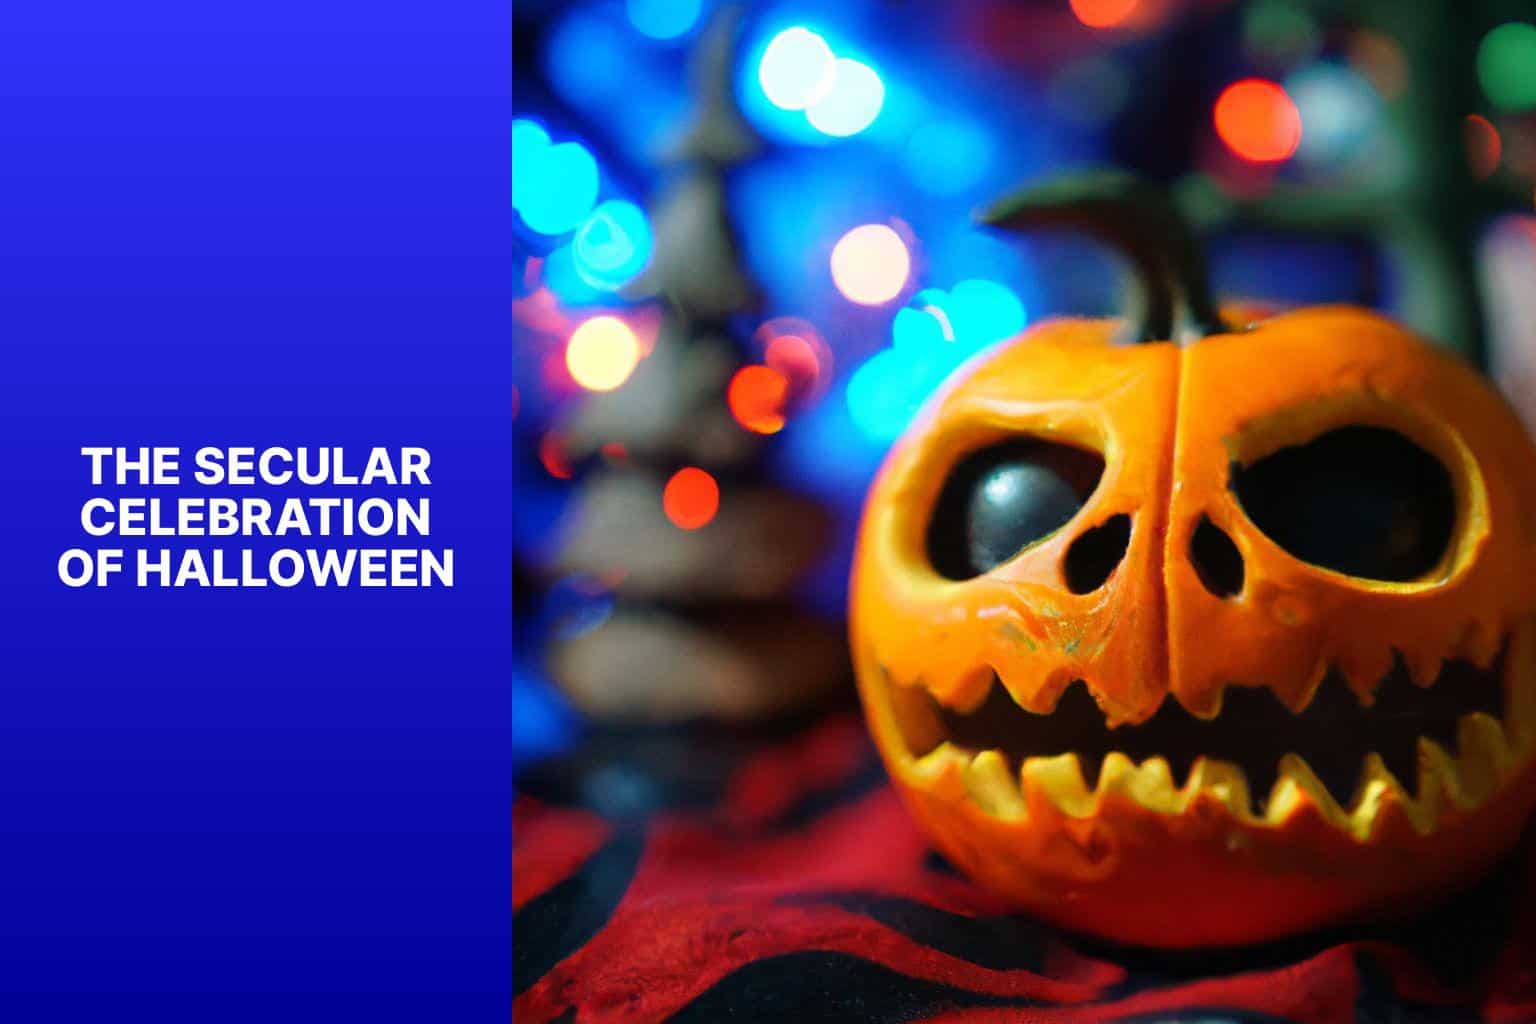 The Secular Celebration of Halloween - is halloween the devil